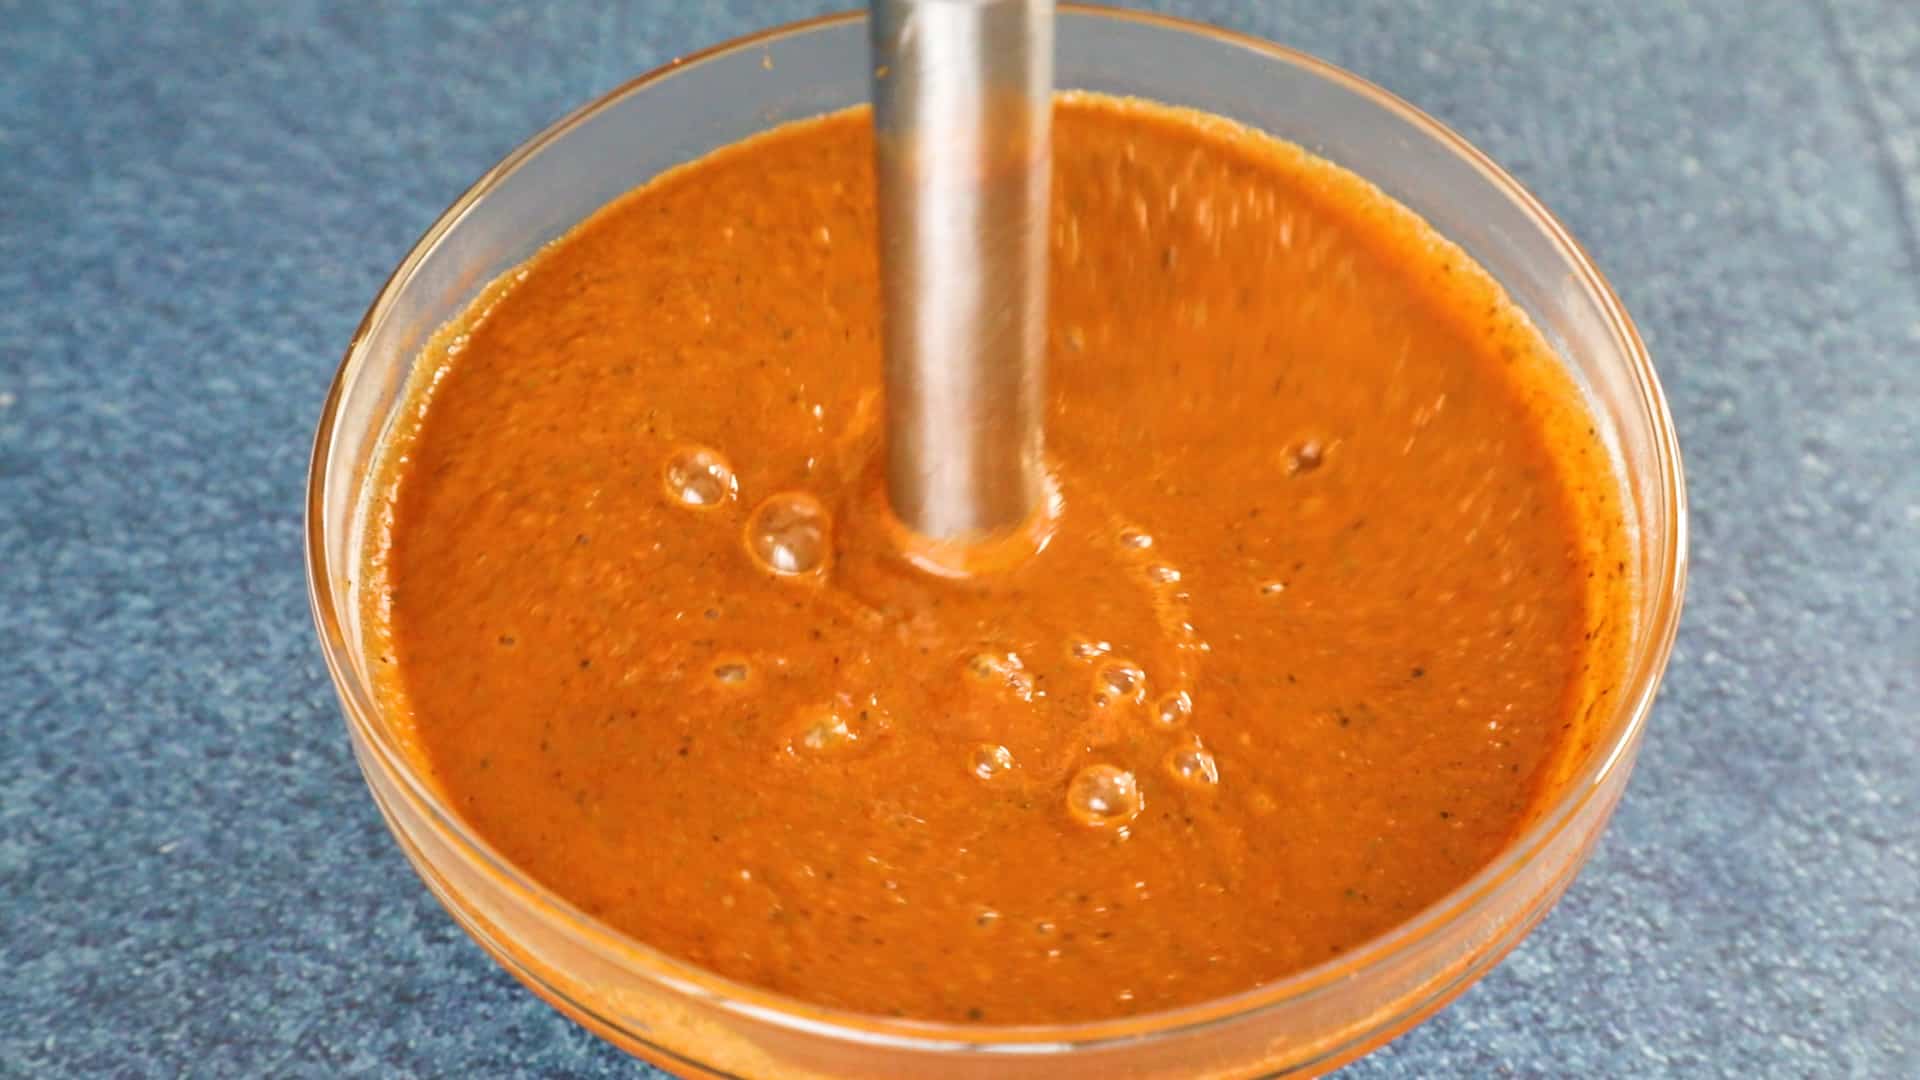 Processing the ranchero sauce with a stick blender